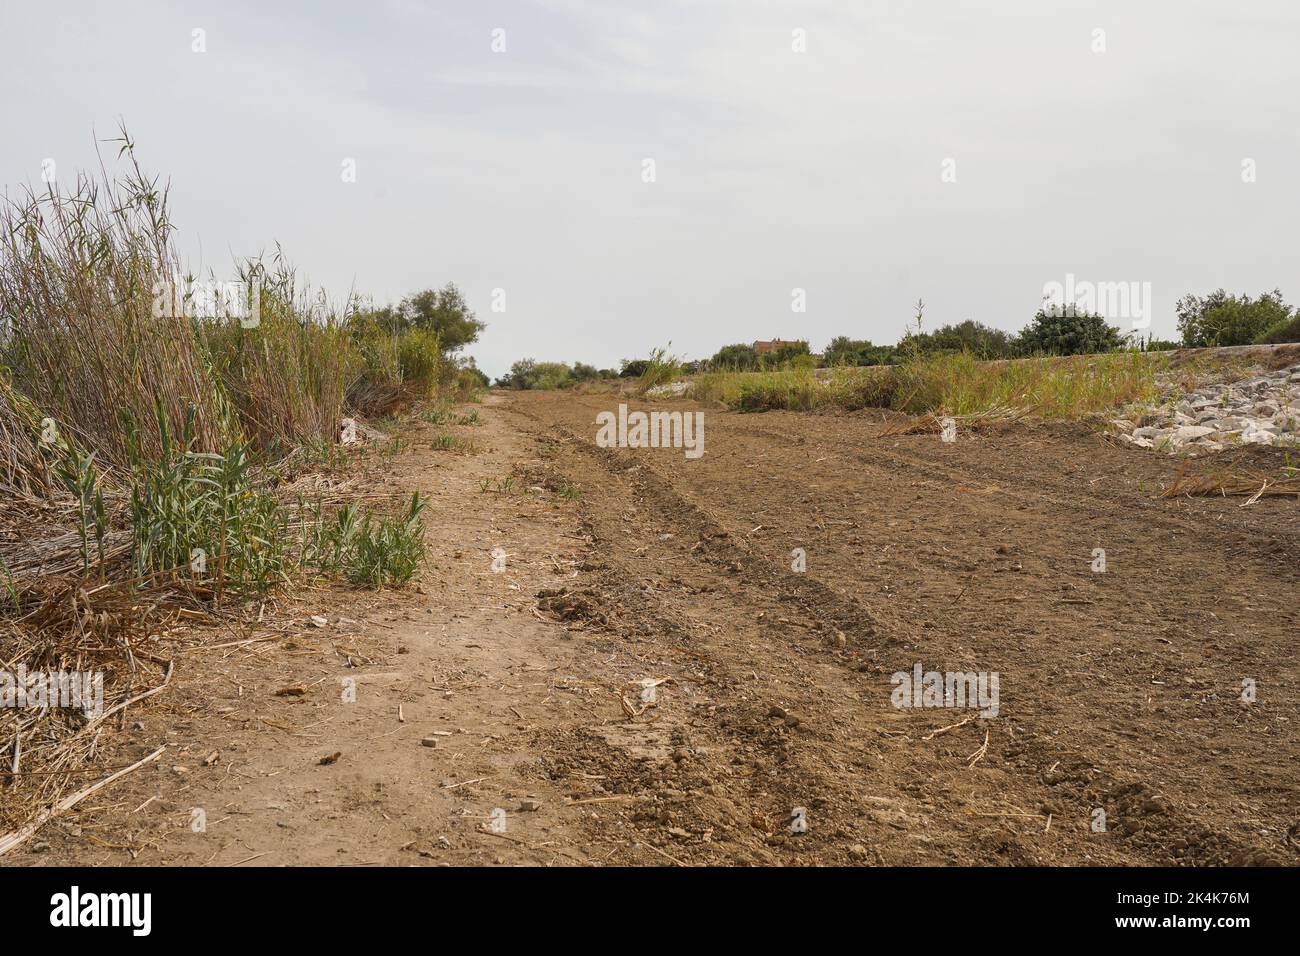 Cleaning up of river banks of Guadalhorce river natural reserve park, Malaga, Andalusia, Spain. Stock Photo